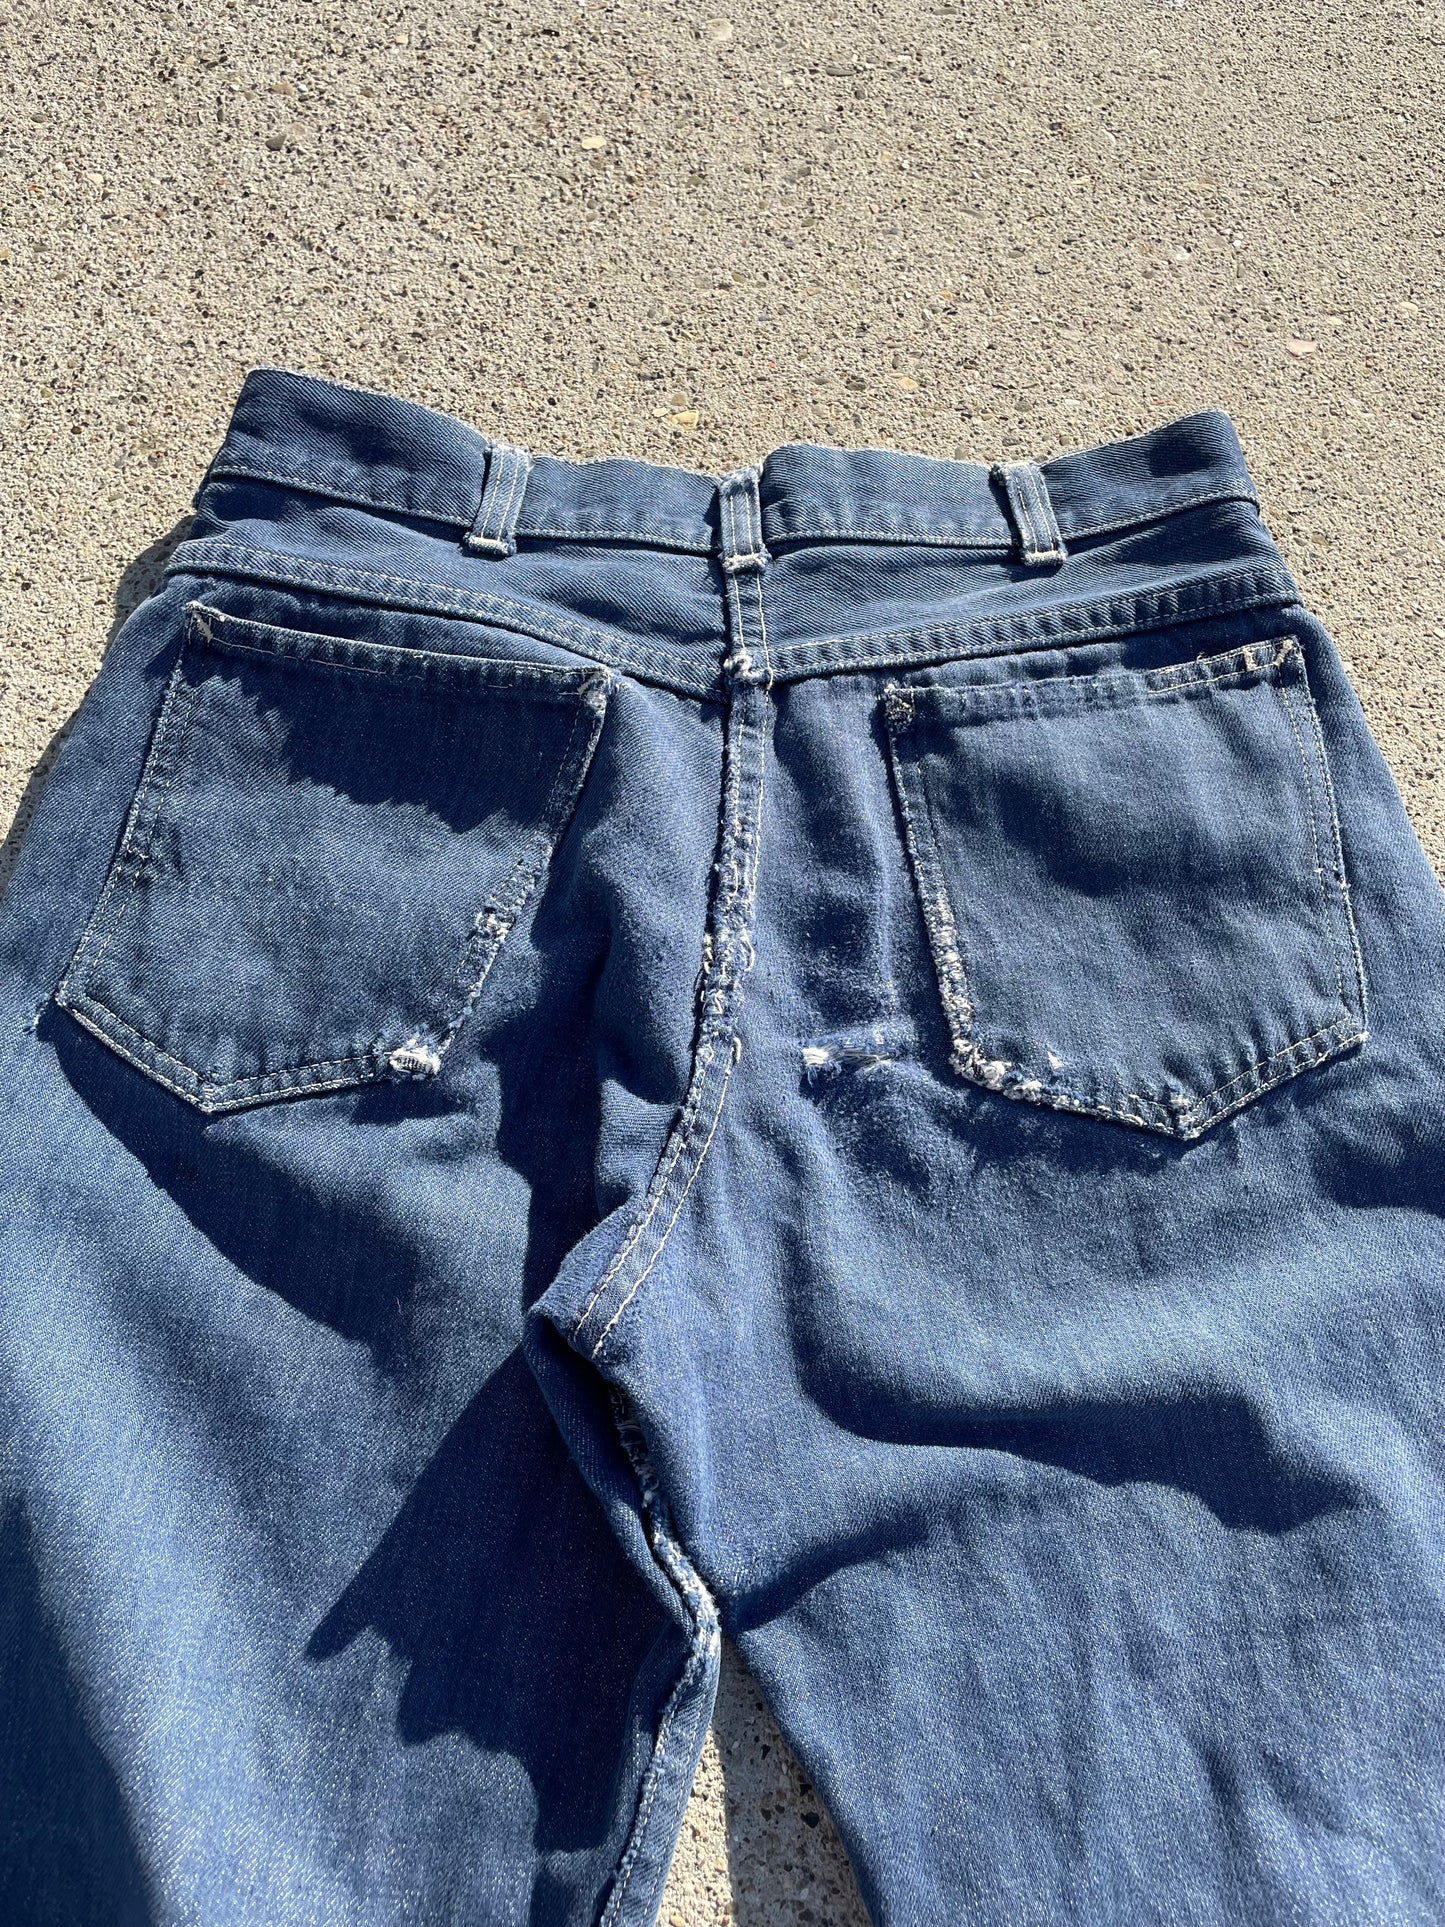 Distressed Selvedge Denim JCP Foremost Jeans